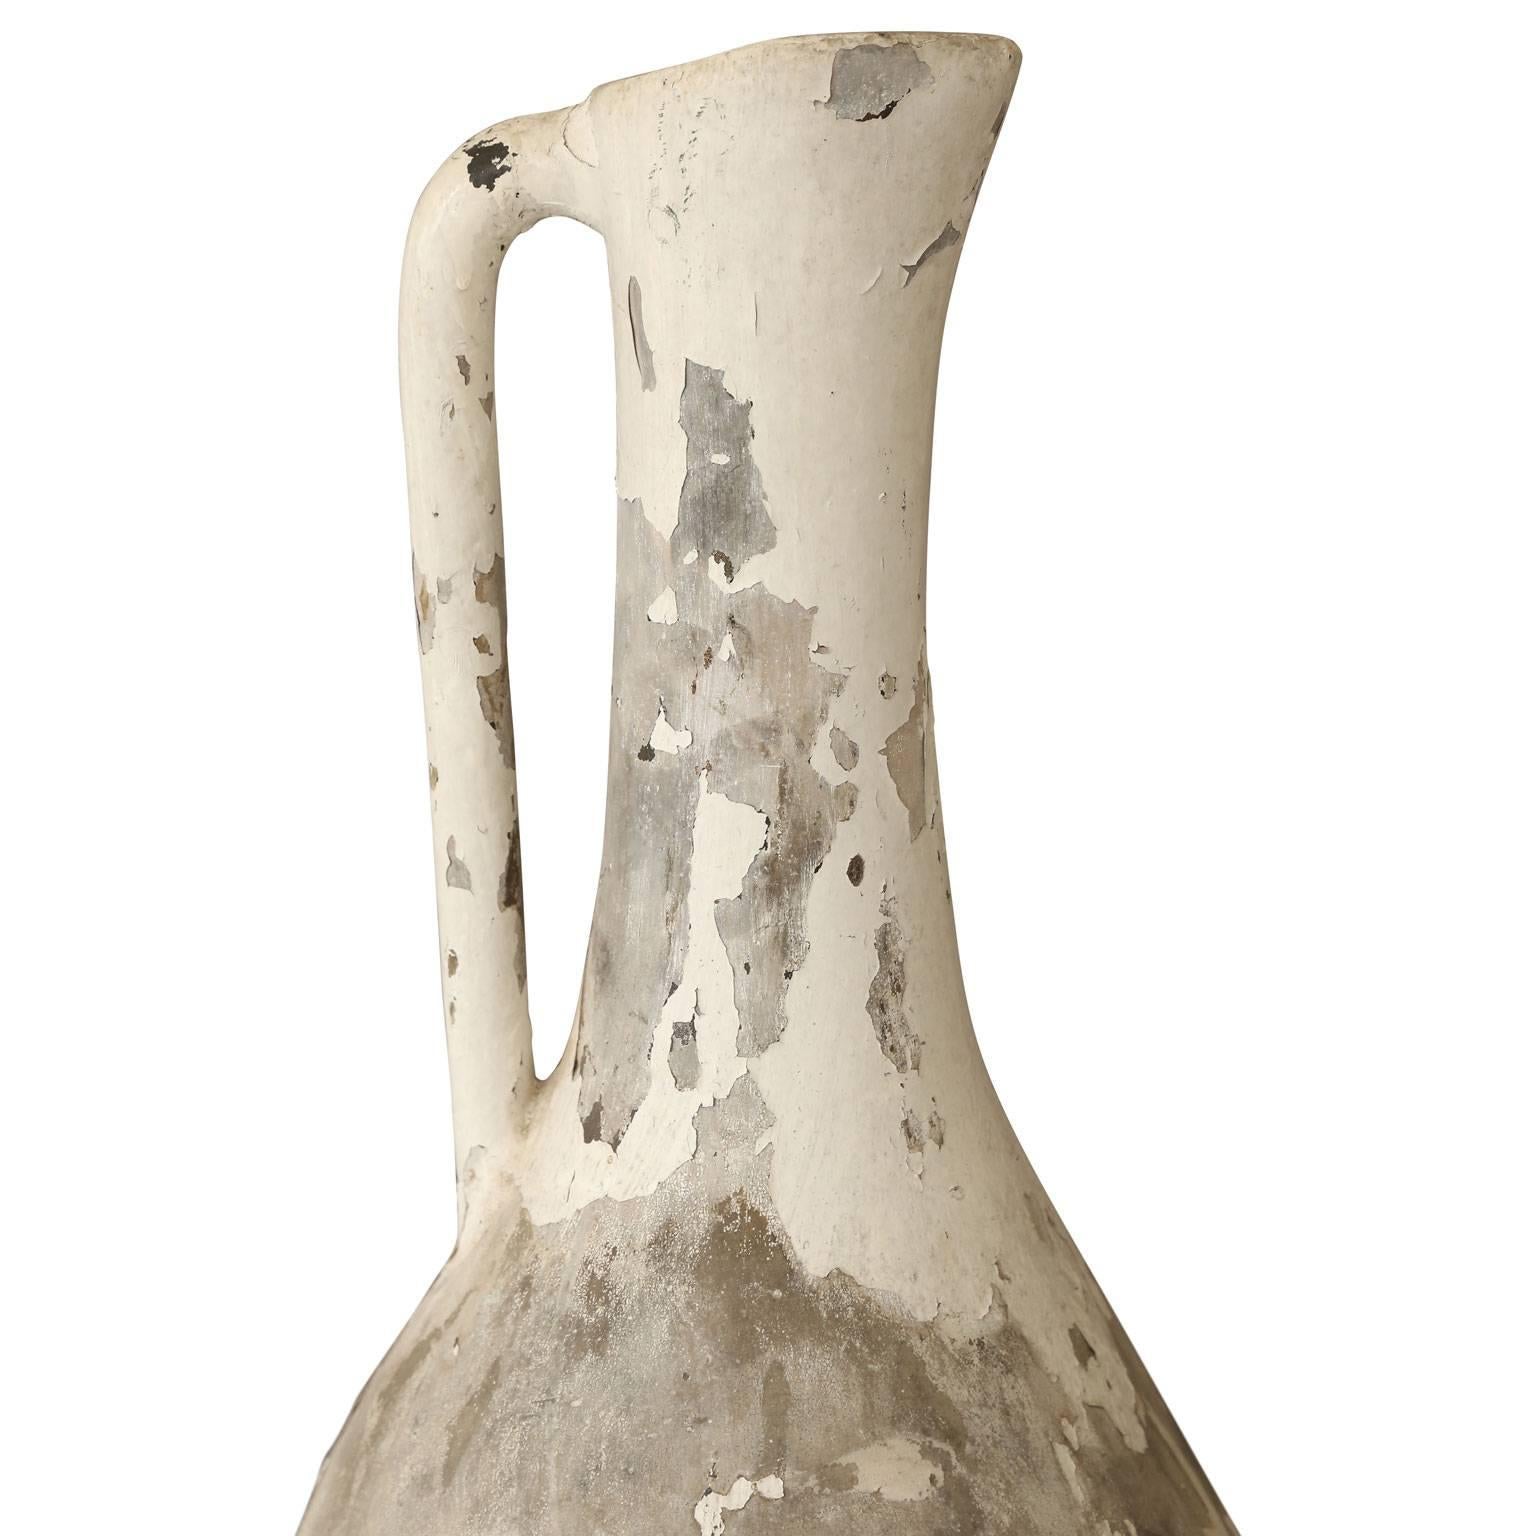 Large, very decorative vintage composite ewer (single handle long-necked vase or pitcher) with remnants of original paint.